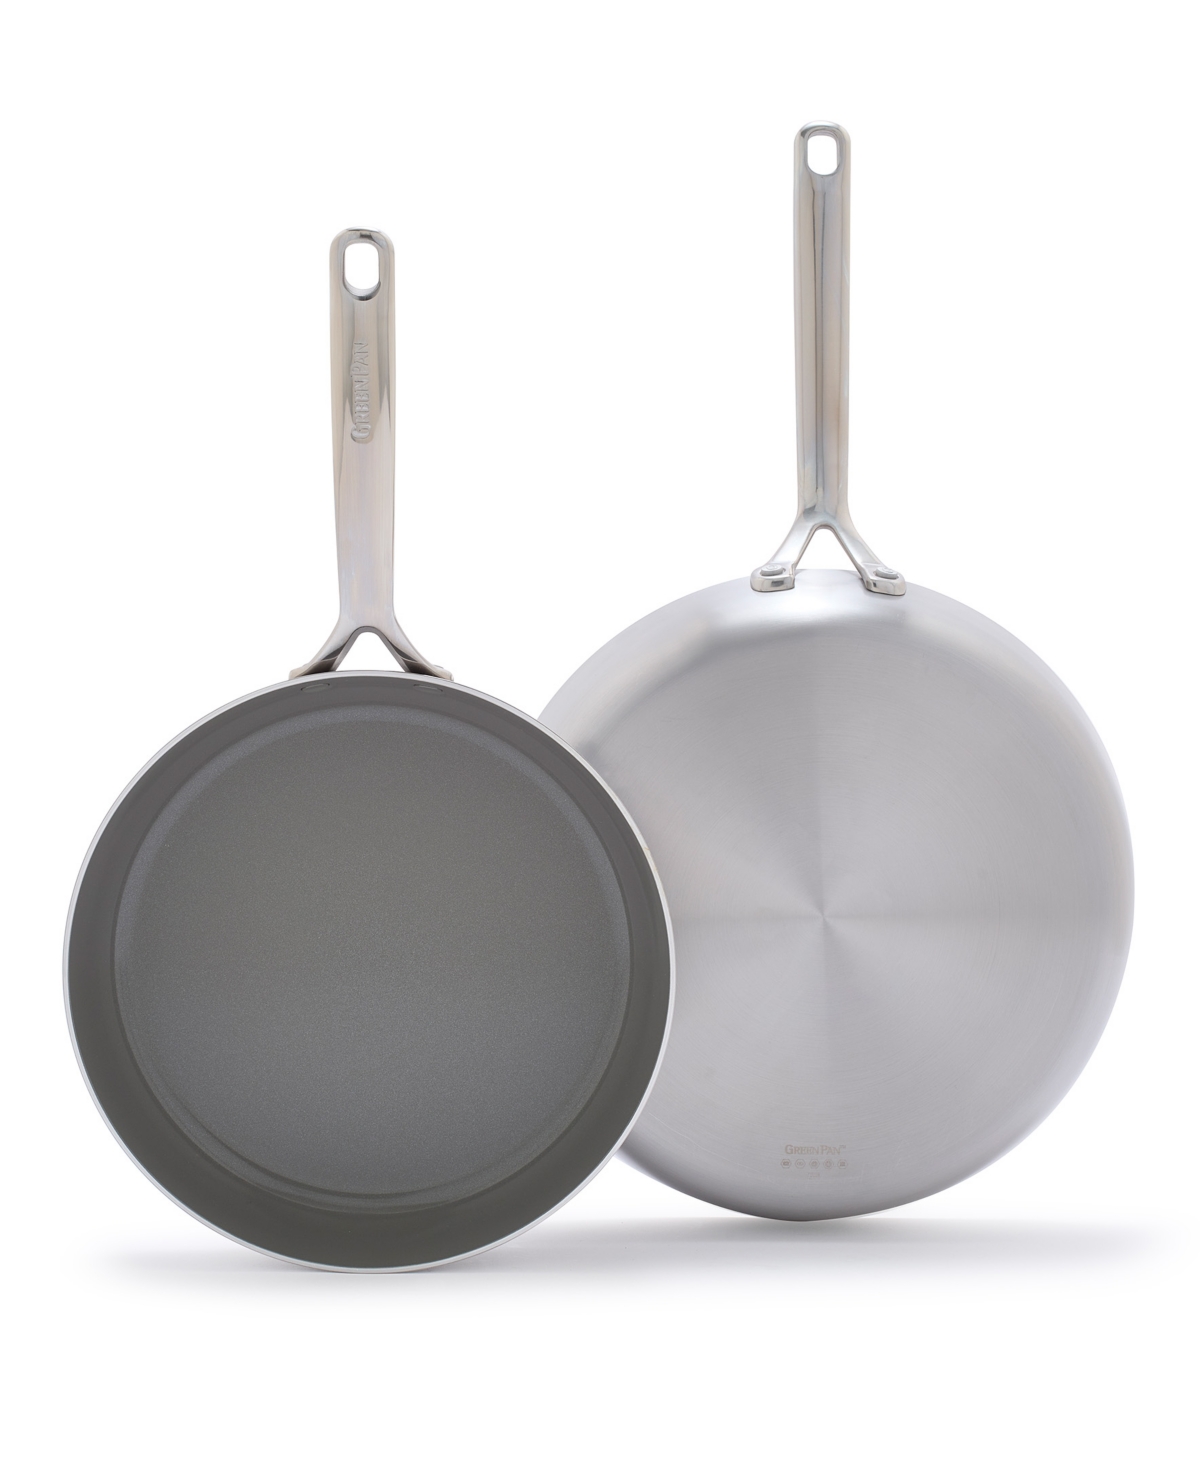 Greenpan Gp5 Stainless Steel Healthy Ceramic Nonstick 2-piece Fry Pan Set, 10" And 12"